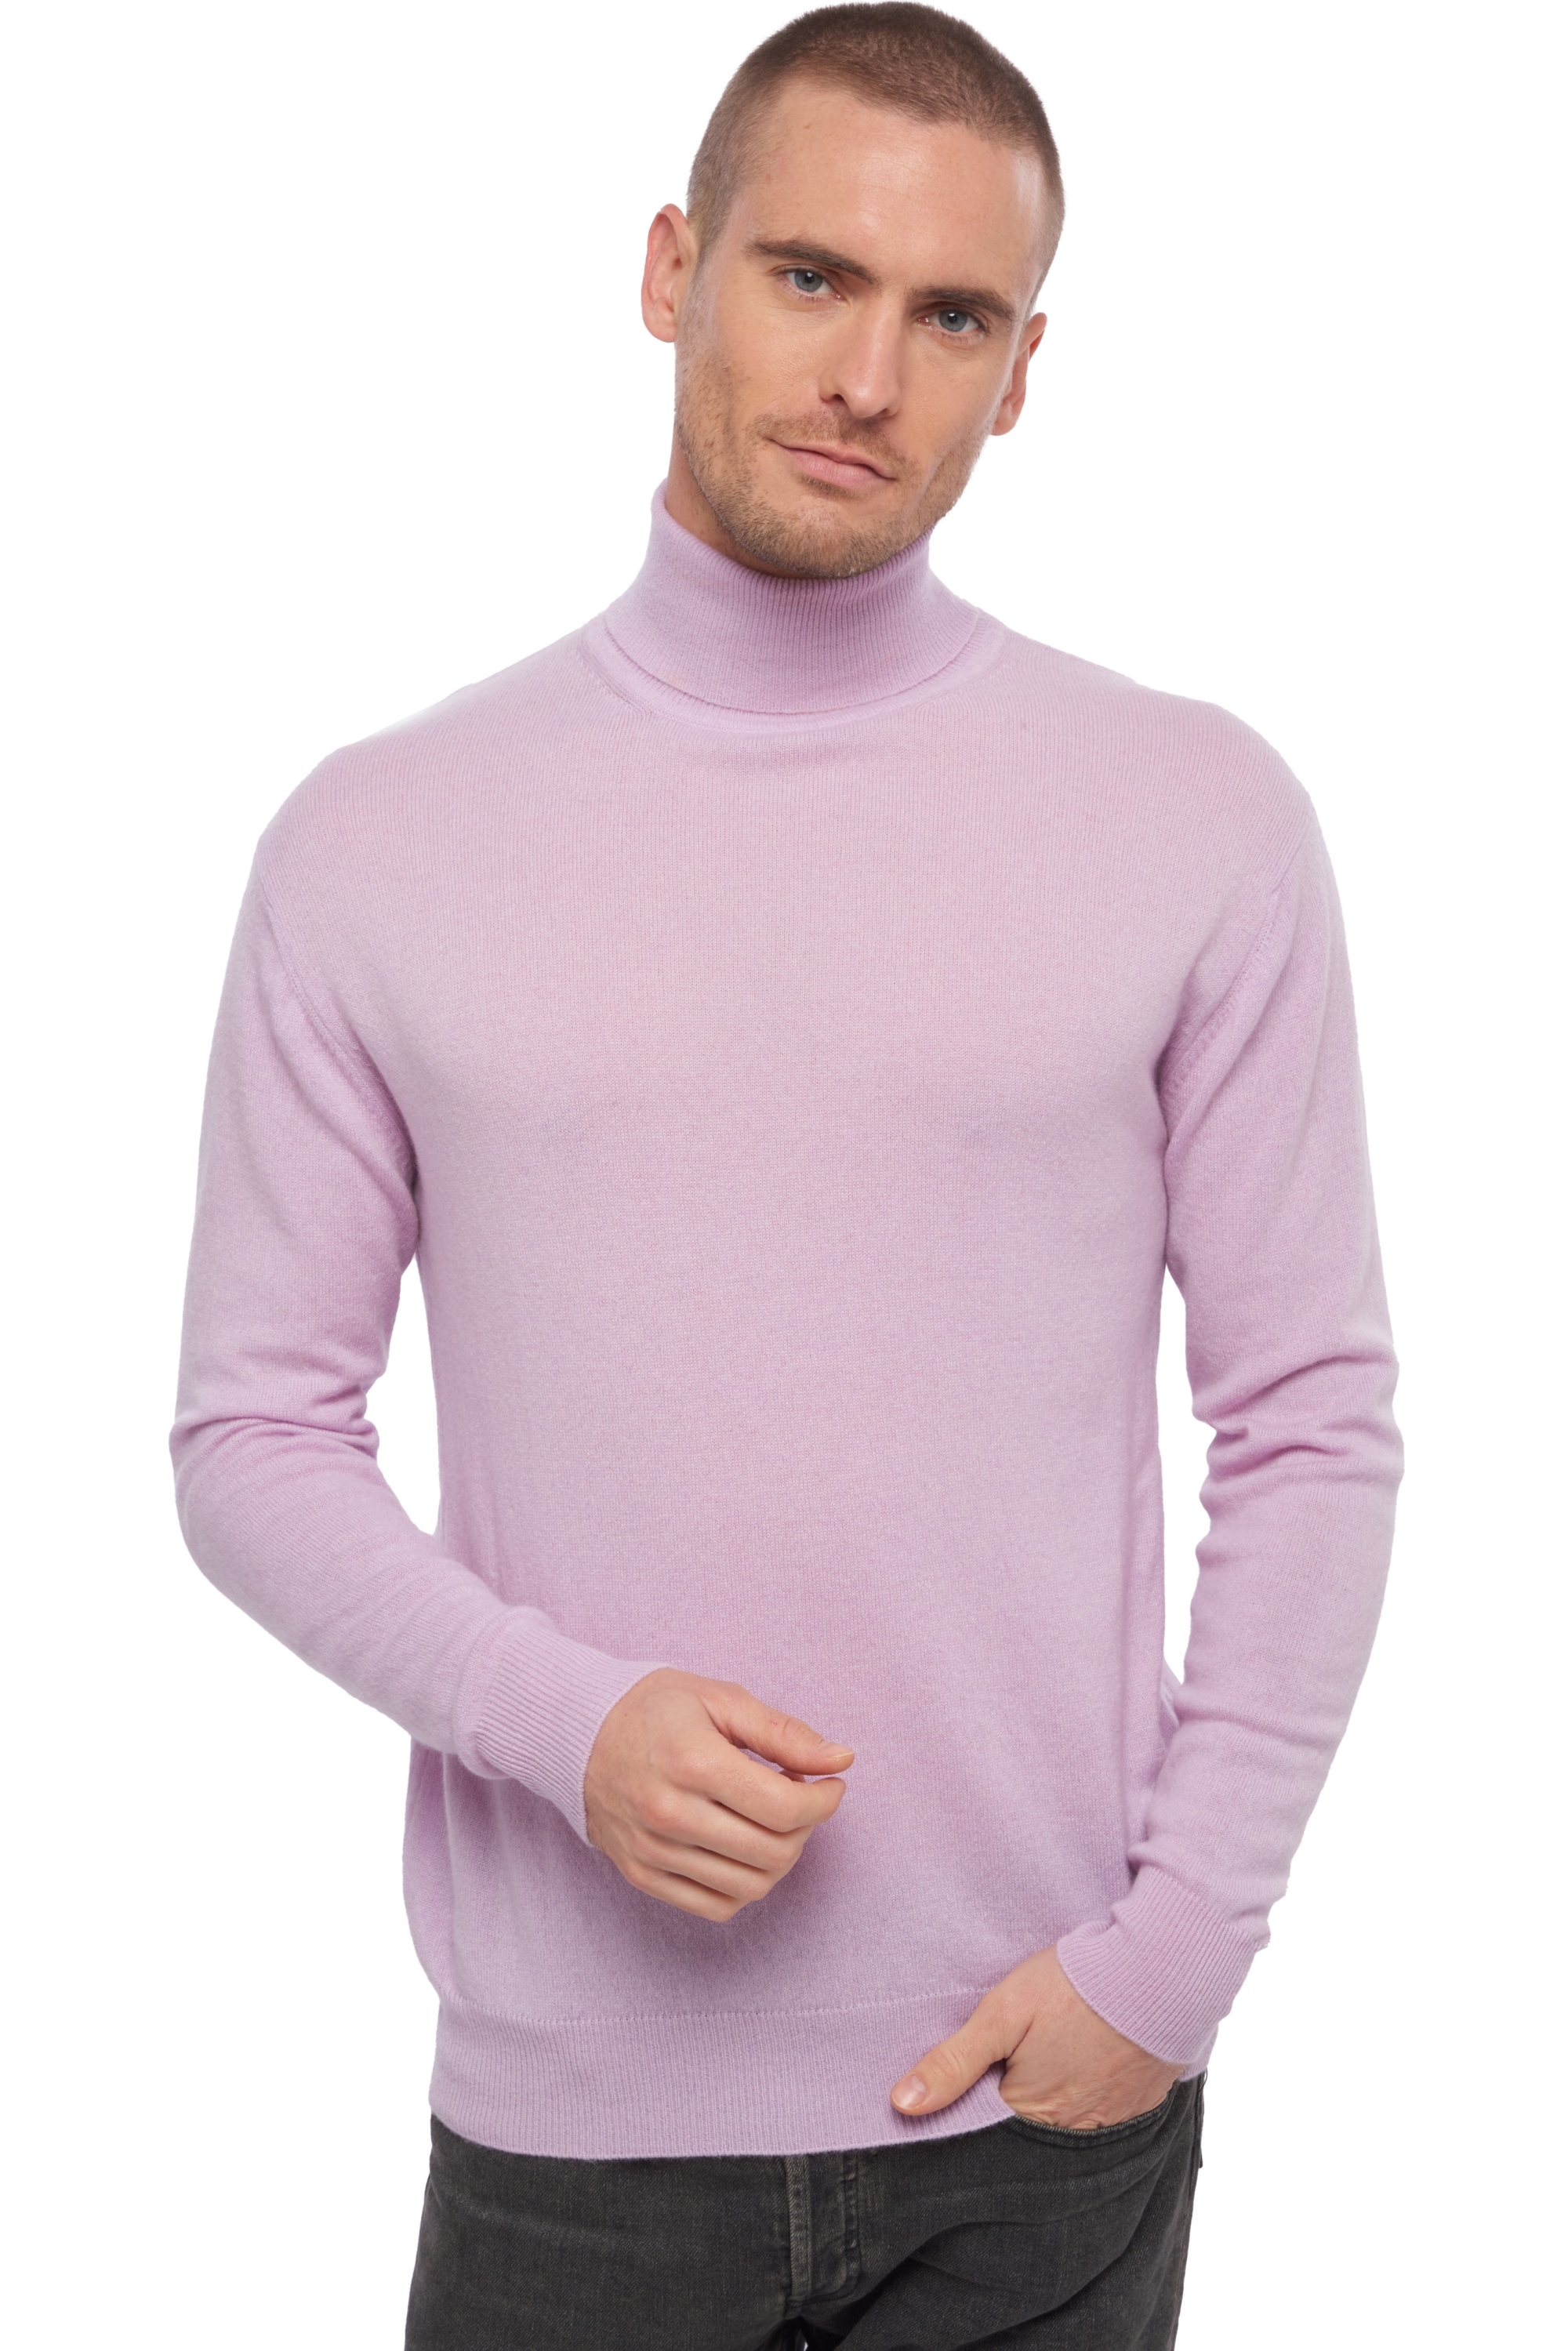 Cachemire pull homme col roule edgar lilas 3xl